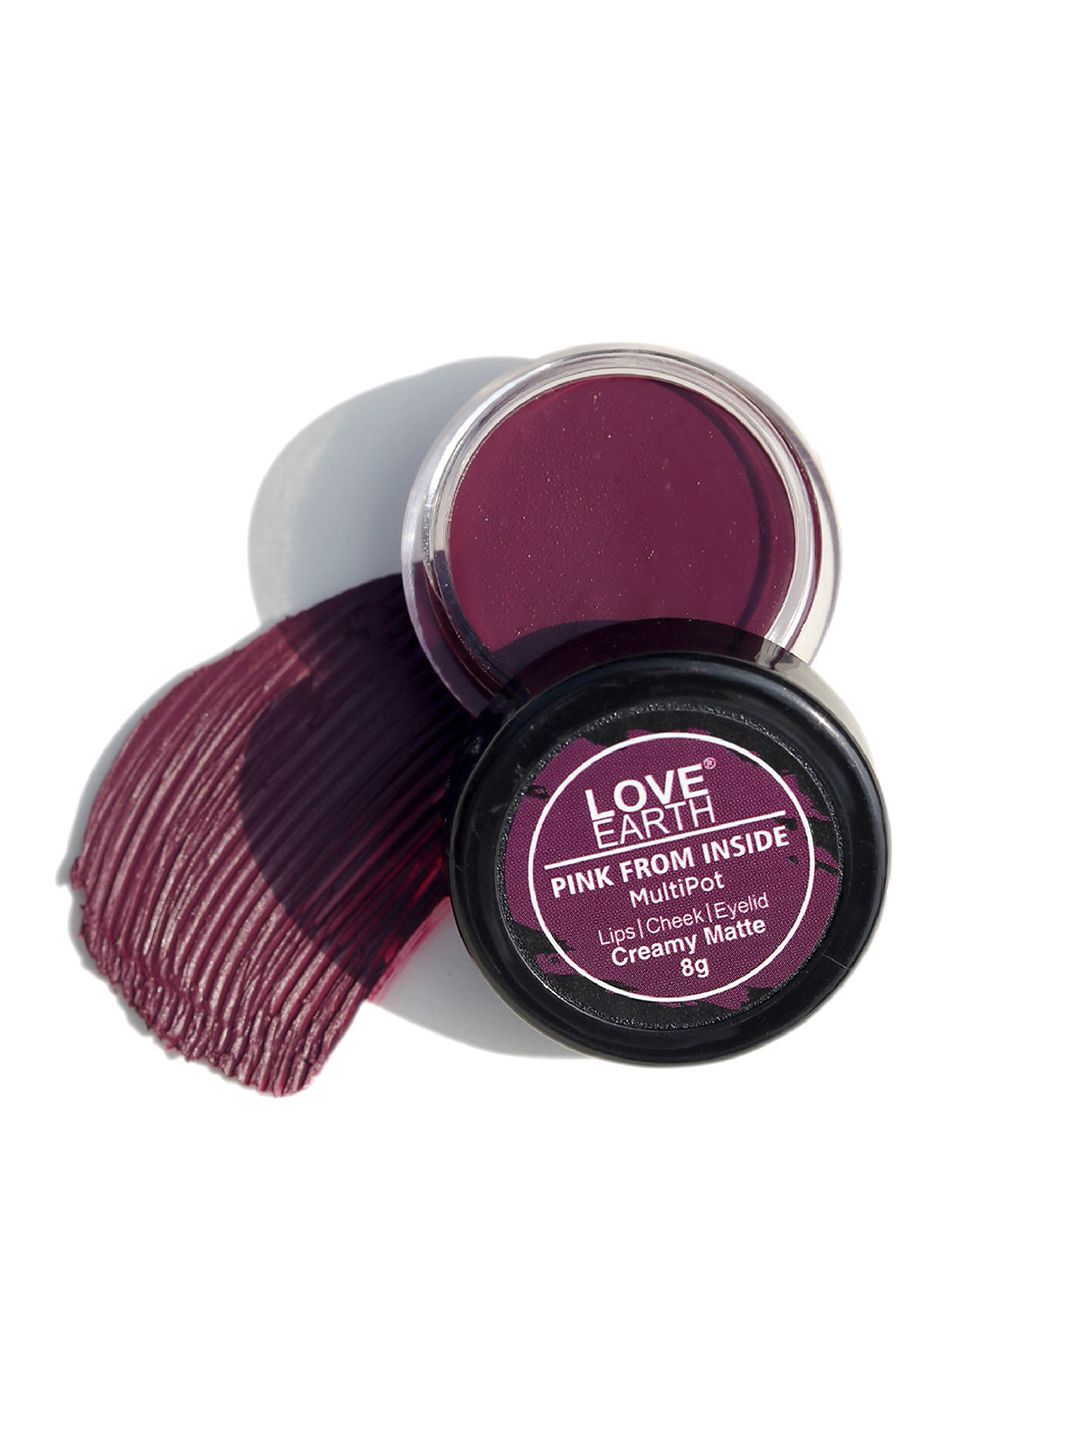 LOVE EARTH Multipot Creamy Matte Lip-Cheek-Eyelid Tint - Pink From Inside Price in India